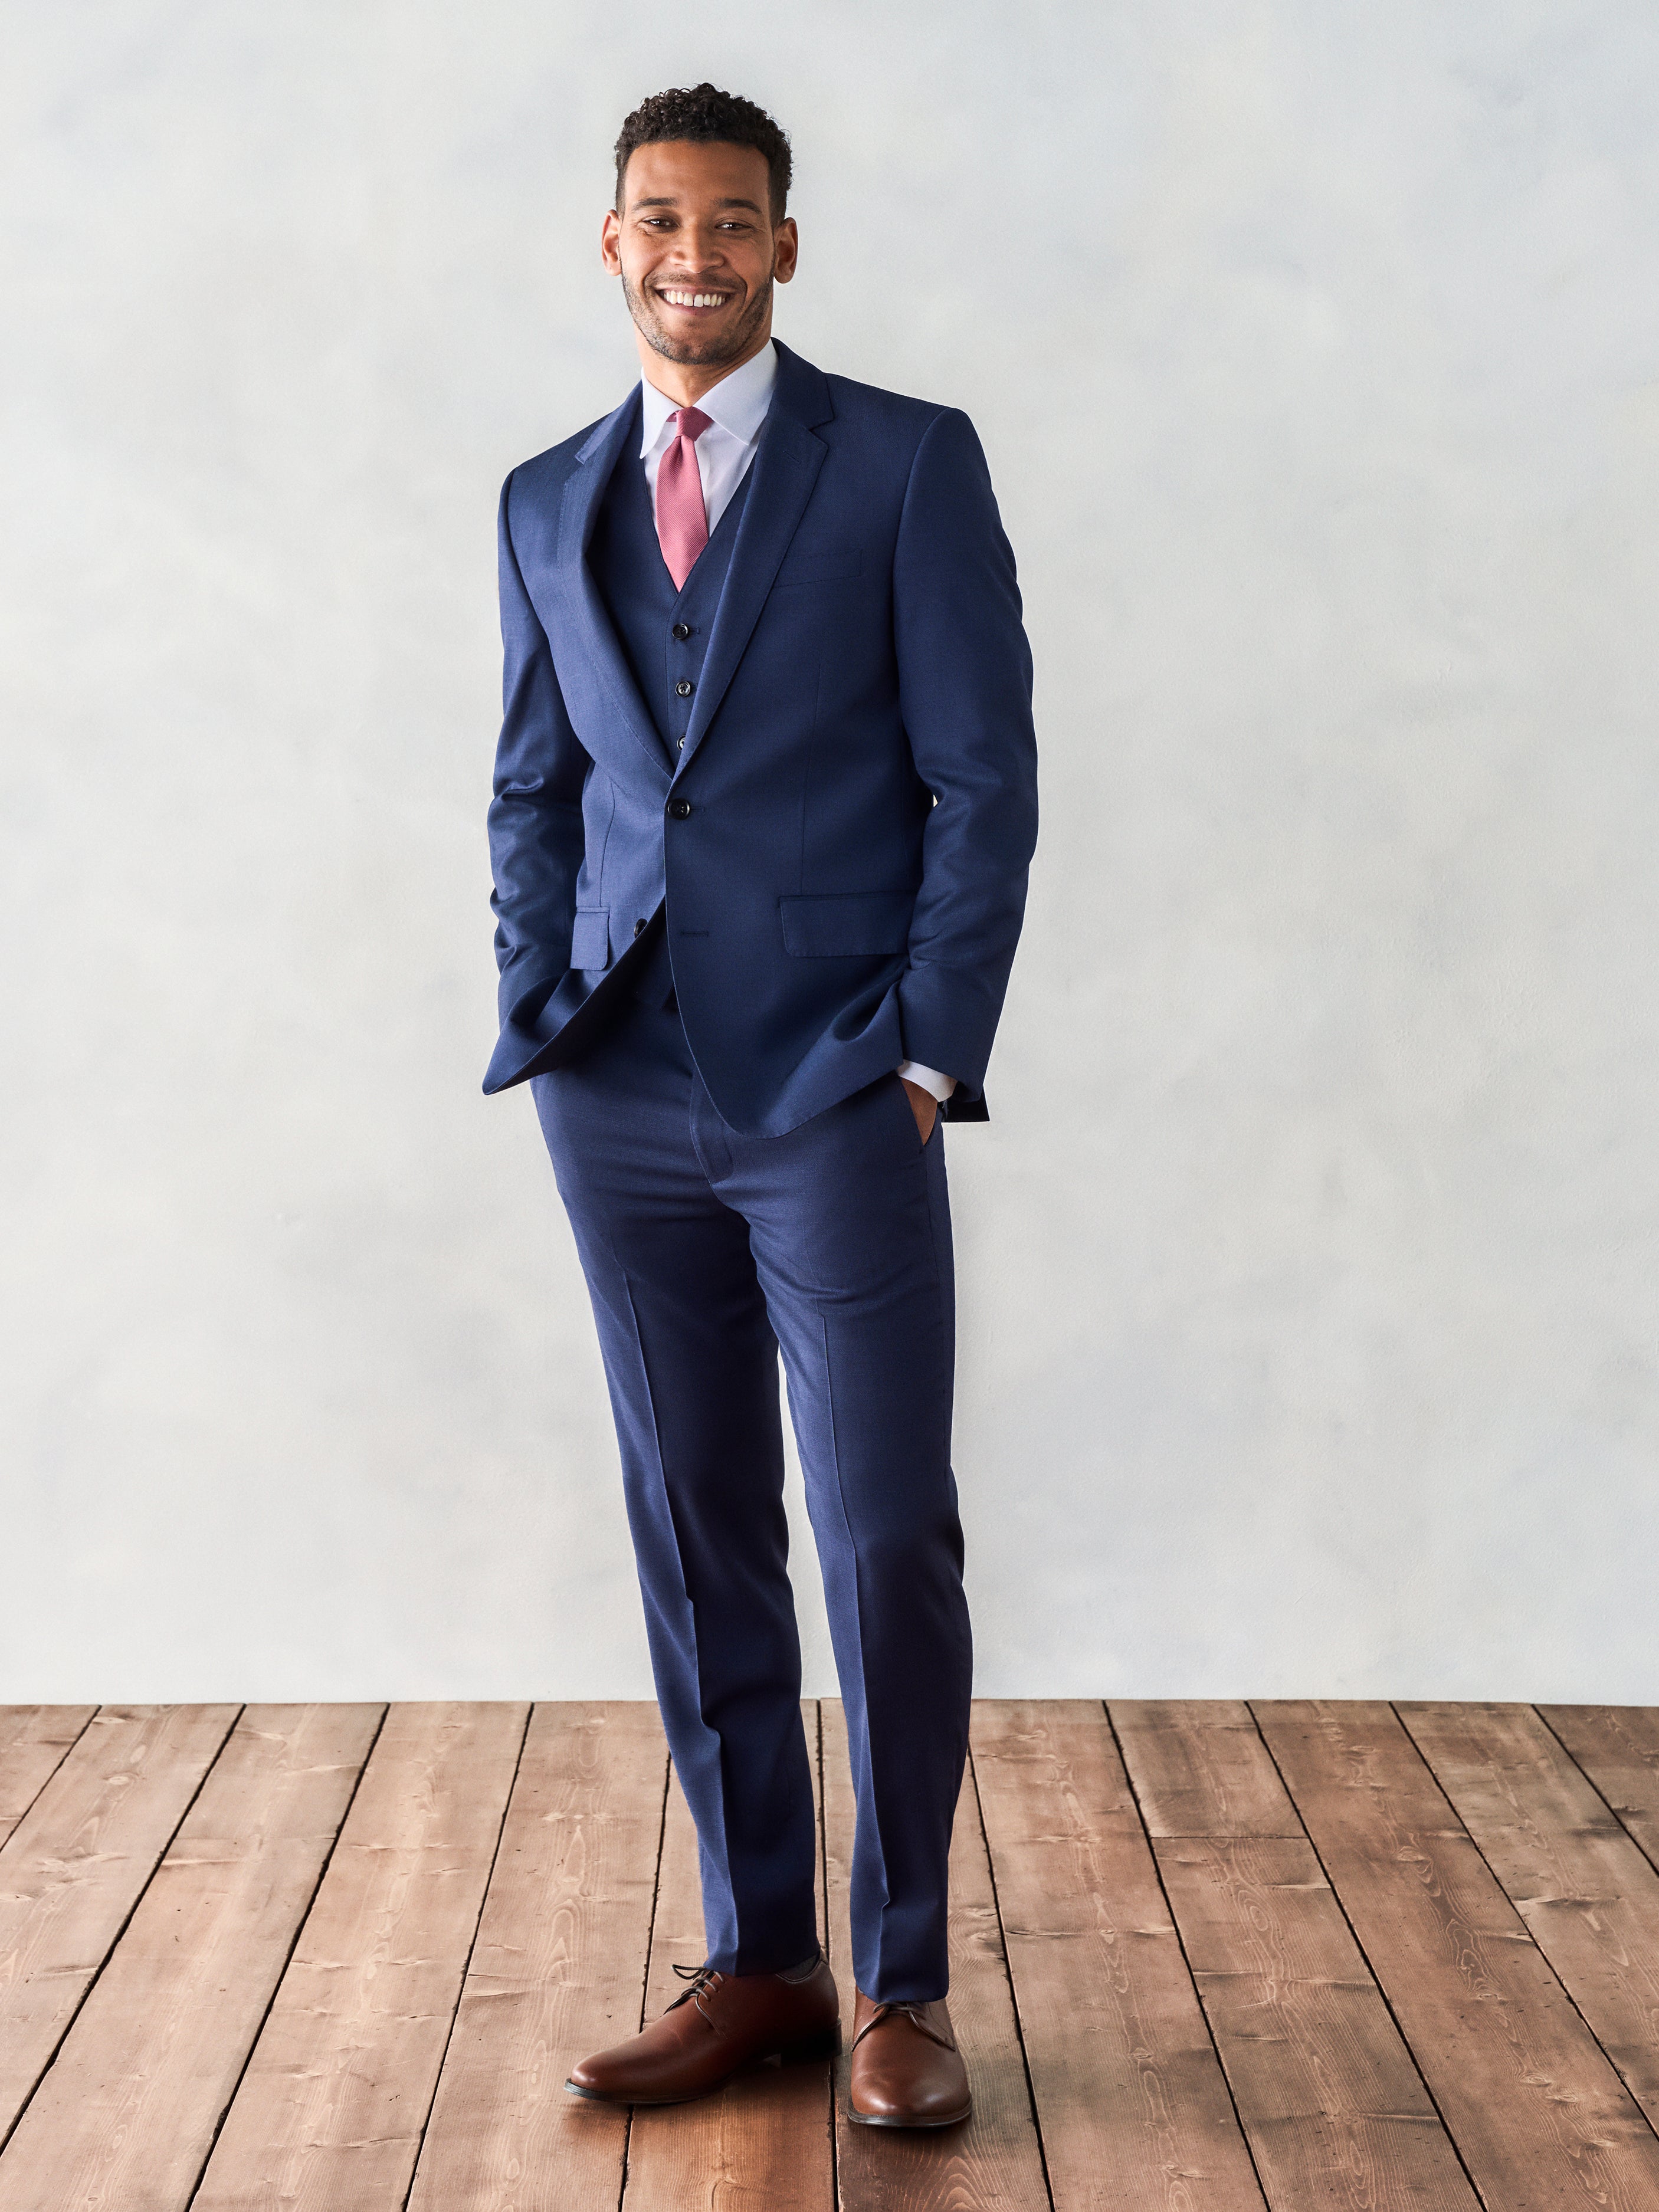 How To Style Your Blue Shoes - Part 1: Suits - The Shoe Snob